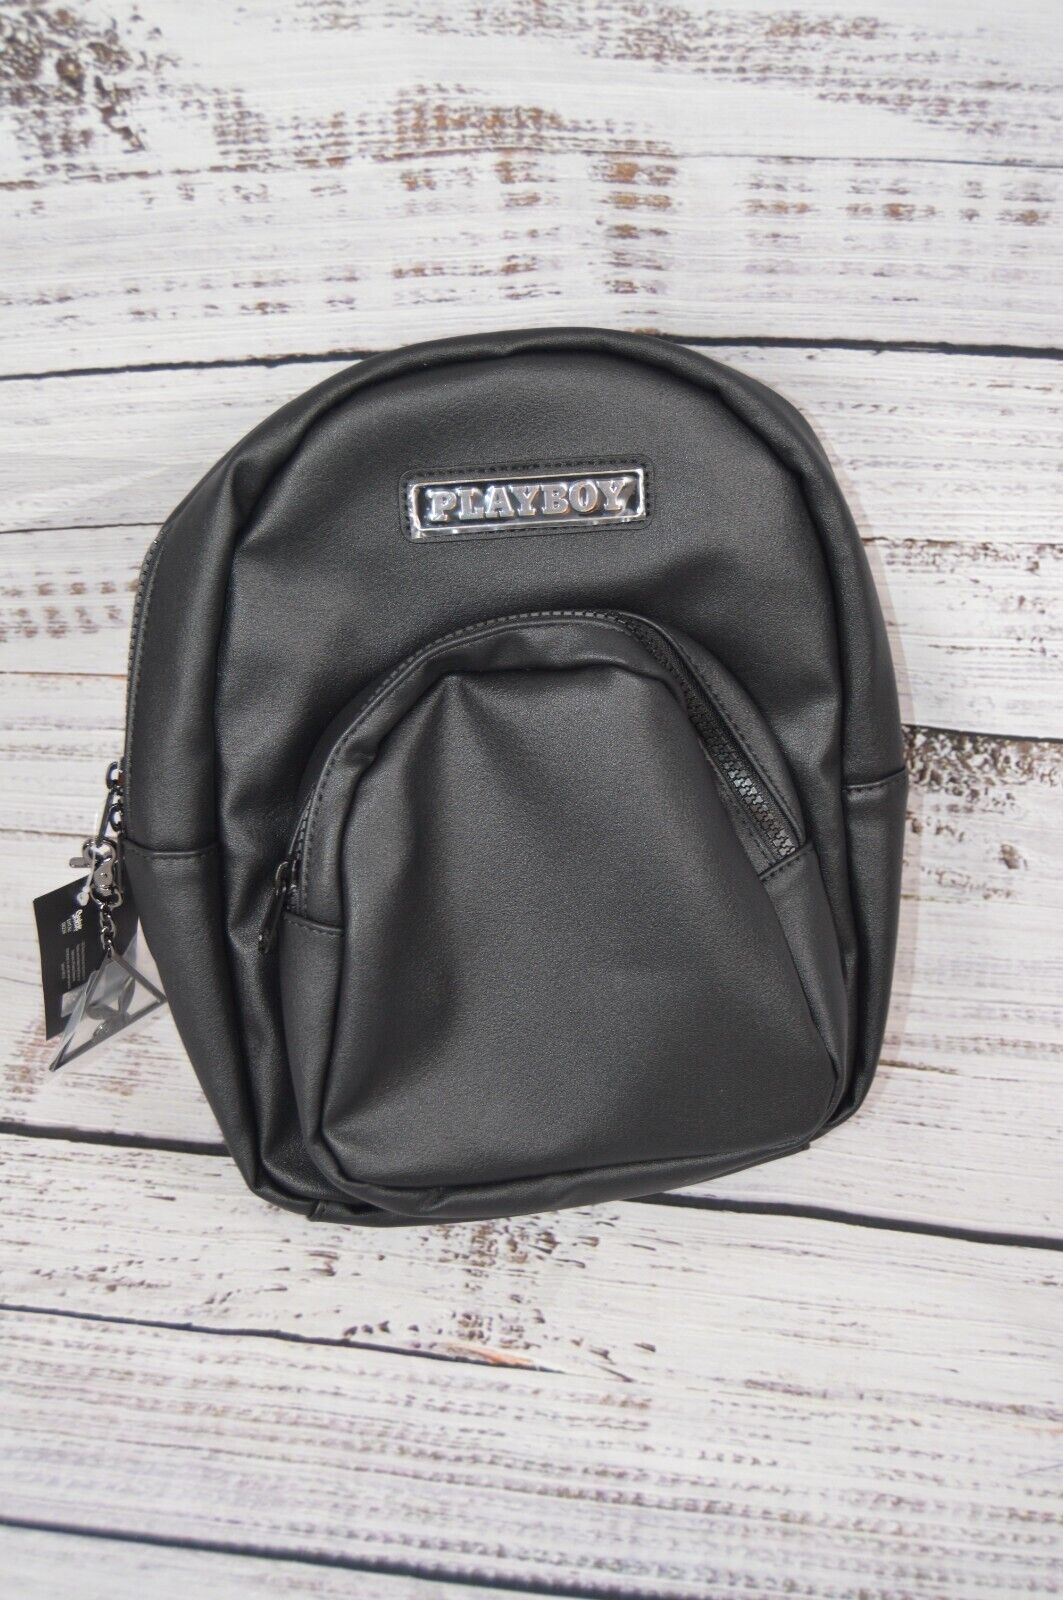 Playboy Black Embossed Mini Backpack Spencers Bunny  NEW NWT